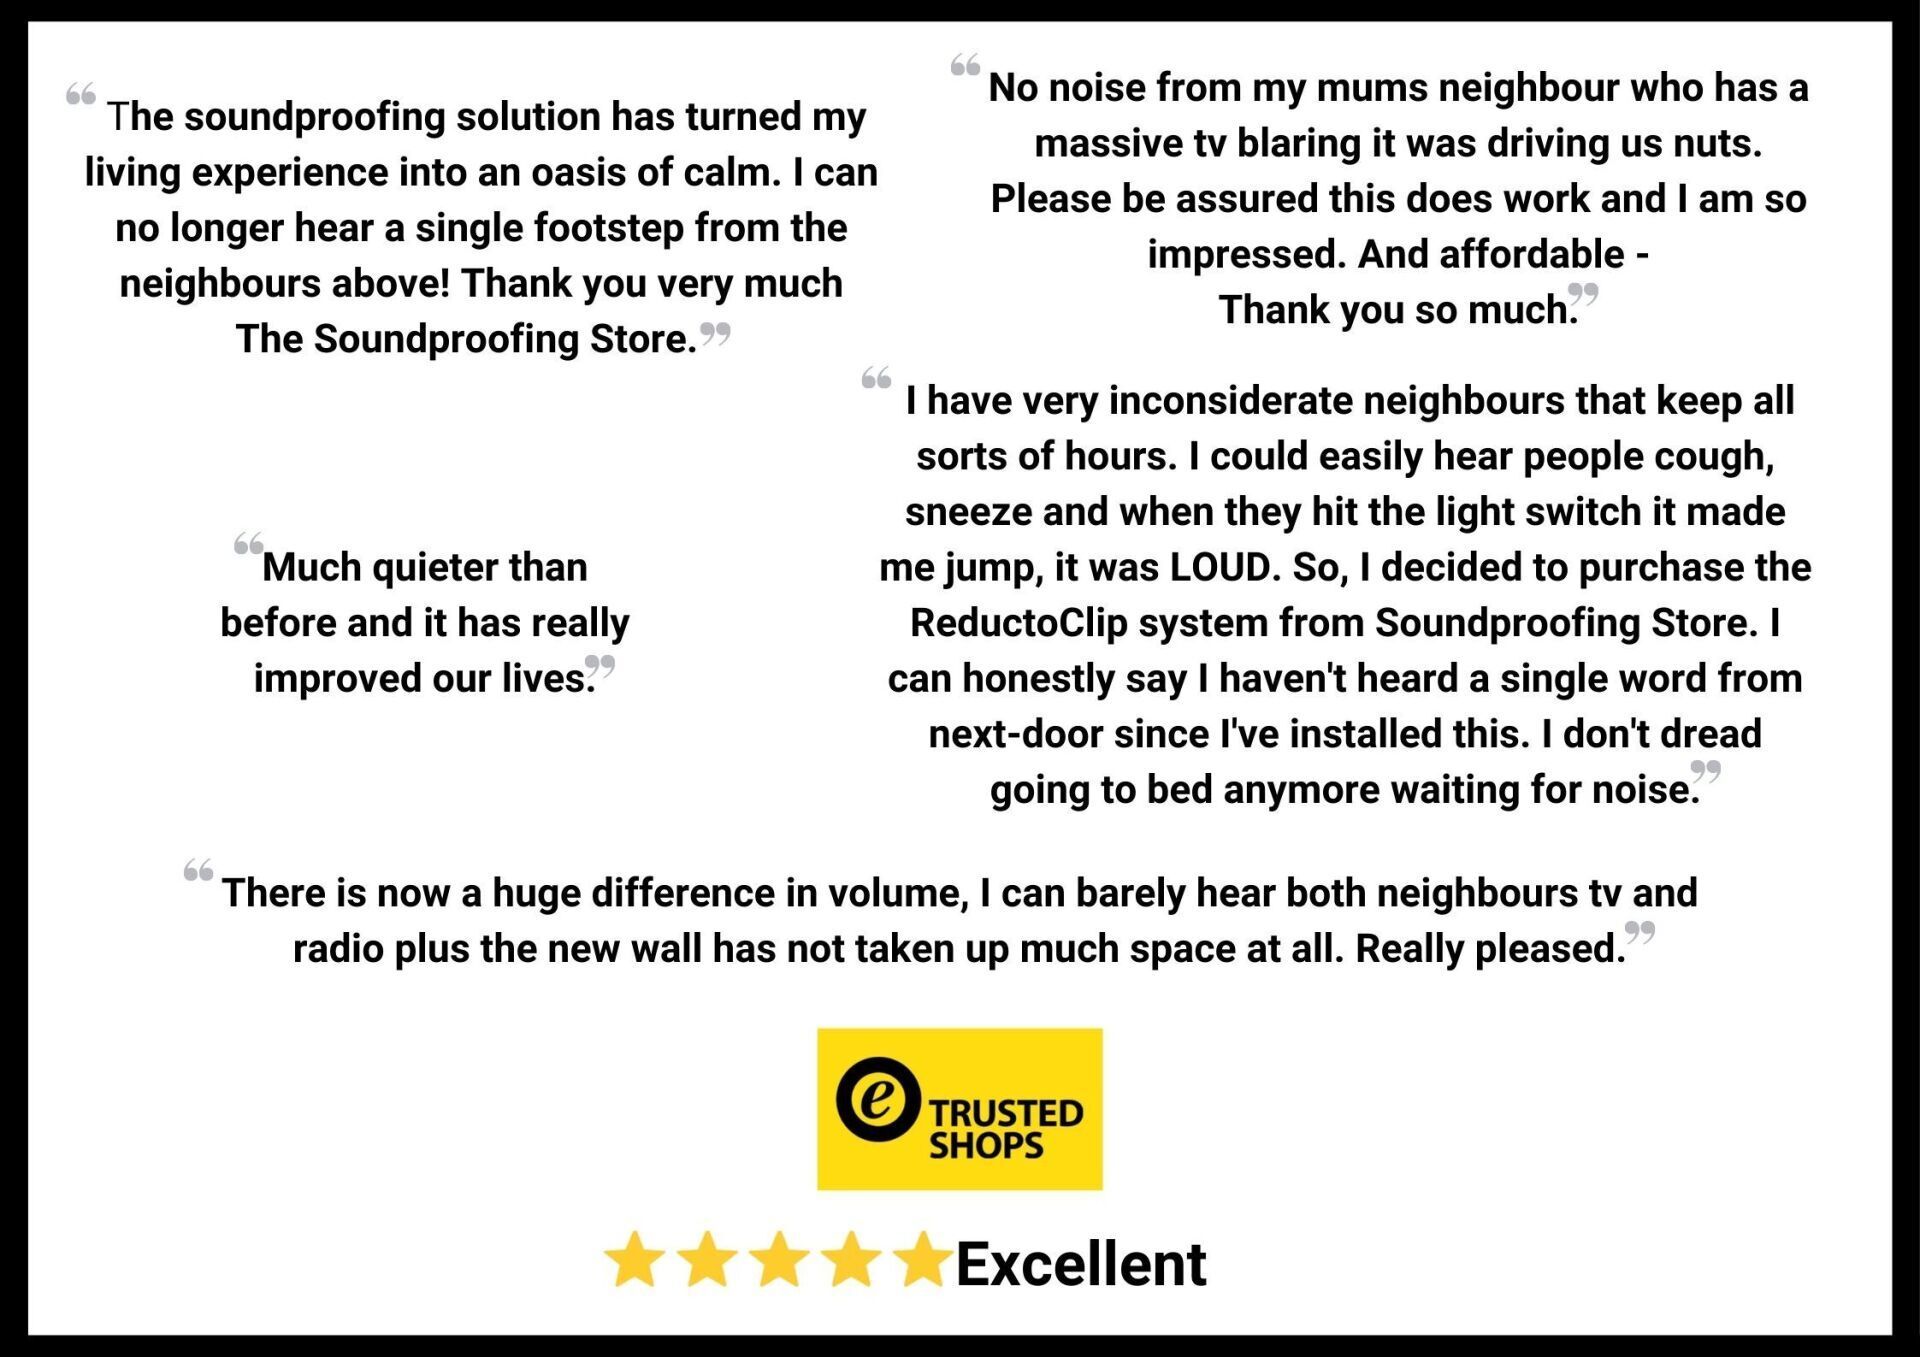 Does soundproofing work? Testimonials